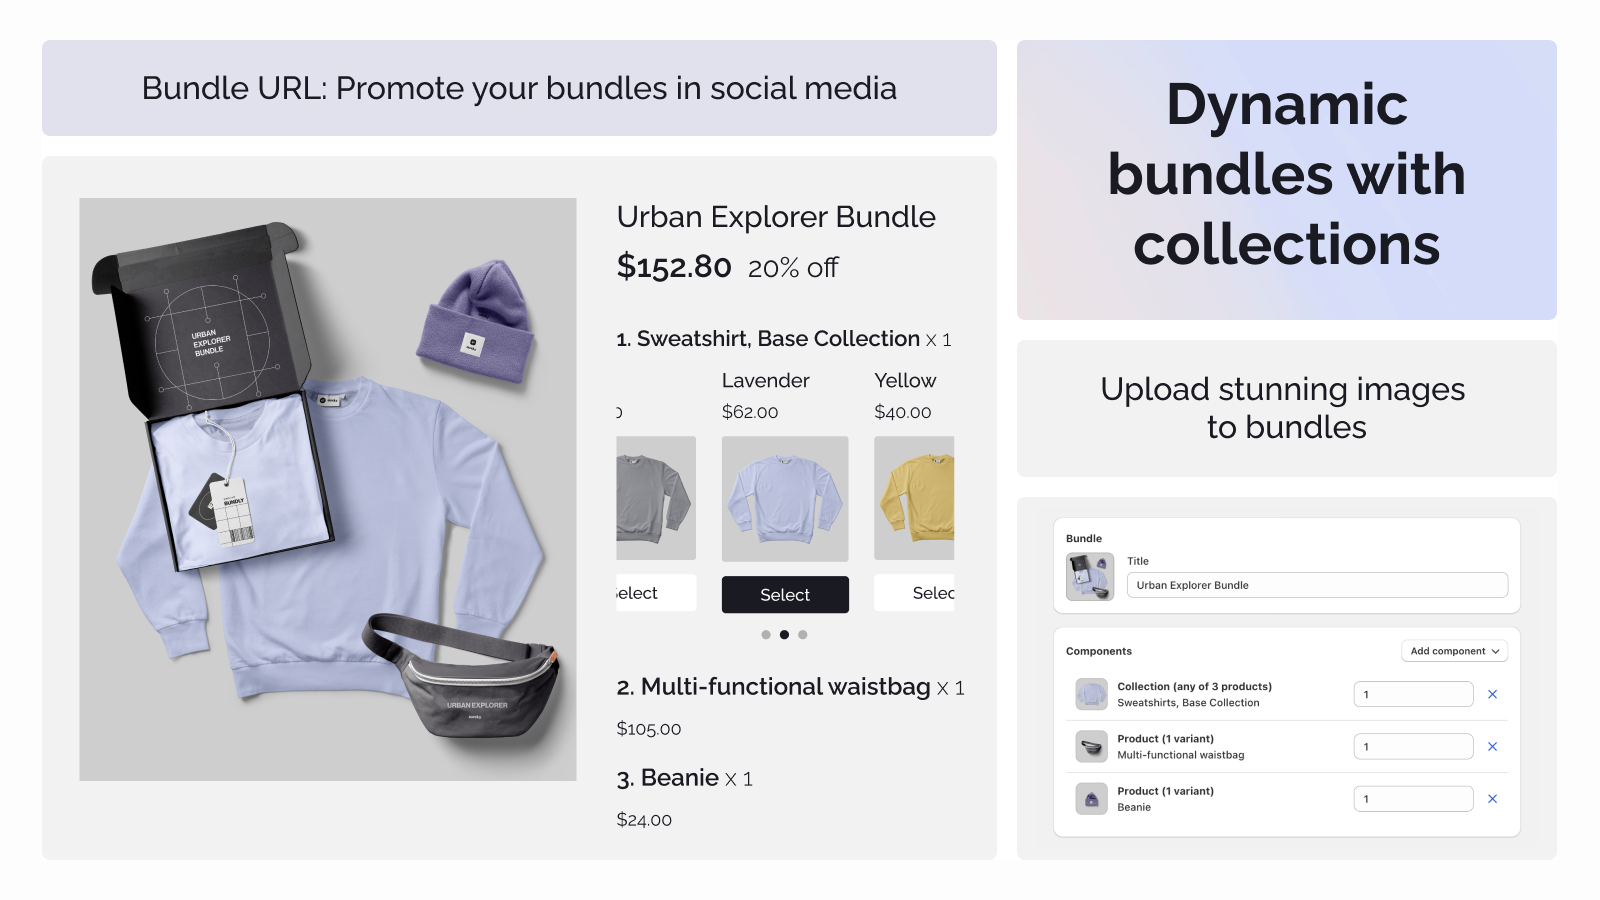 Dynamic bundles with collections